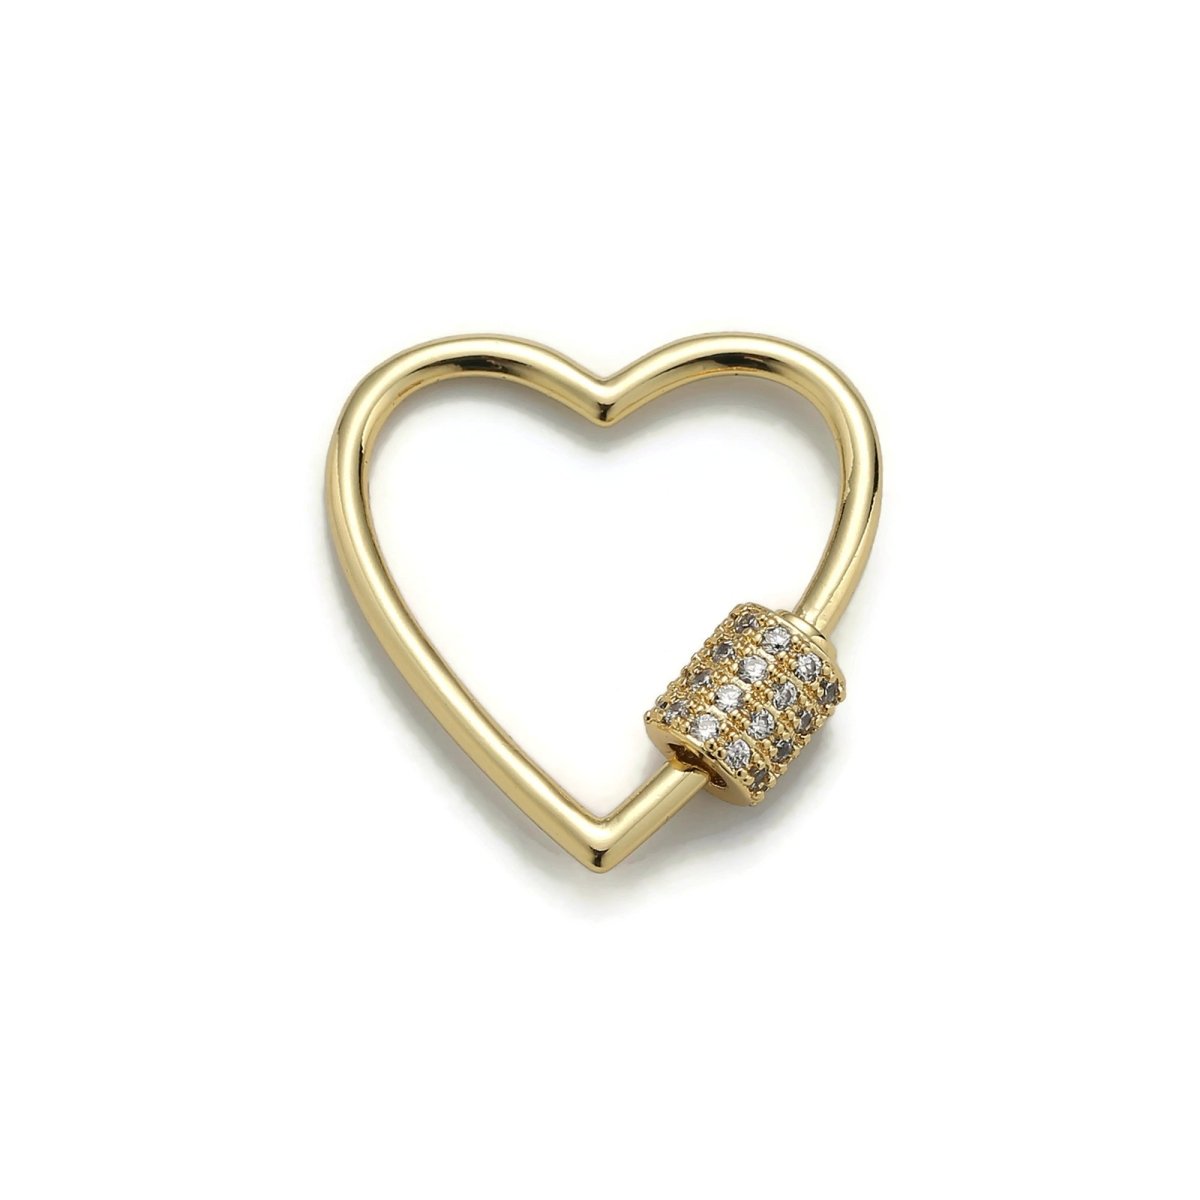 24K Gold-Plated Heart Carabiner, Circle Screw Clasp with Rhinestones, Gold, Rose Gold, and Black Color Options - DLUXCA